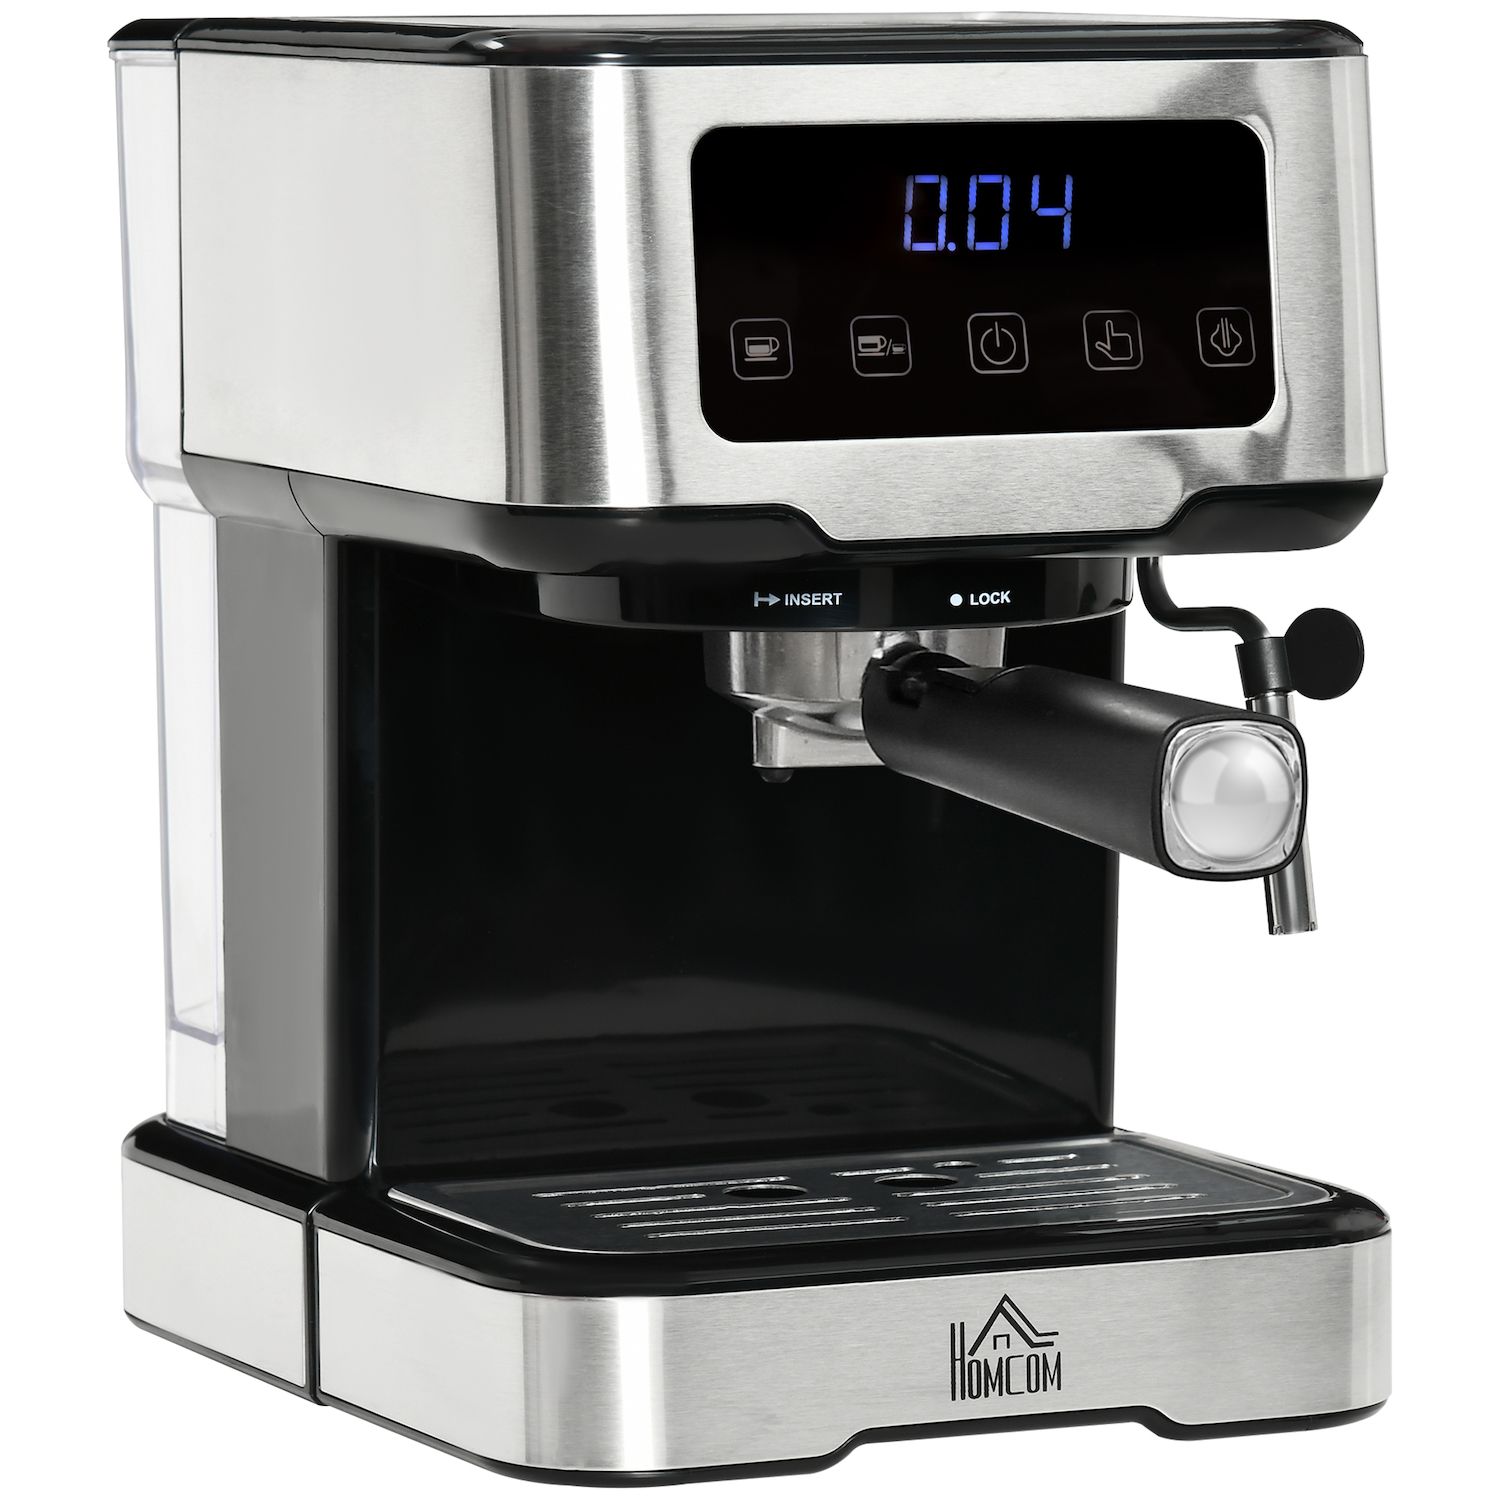 Cyetus Black Espresso Machine with Frother Wand and Electric